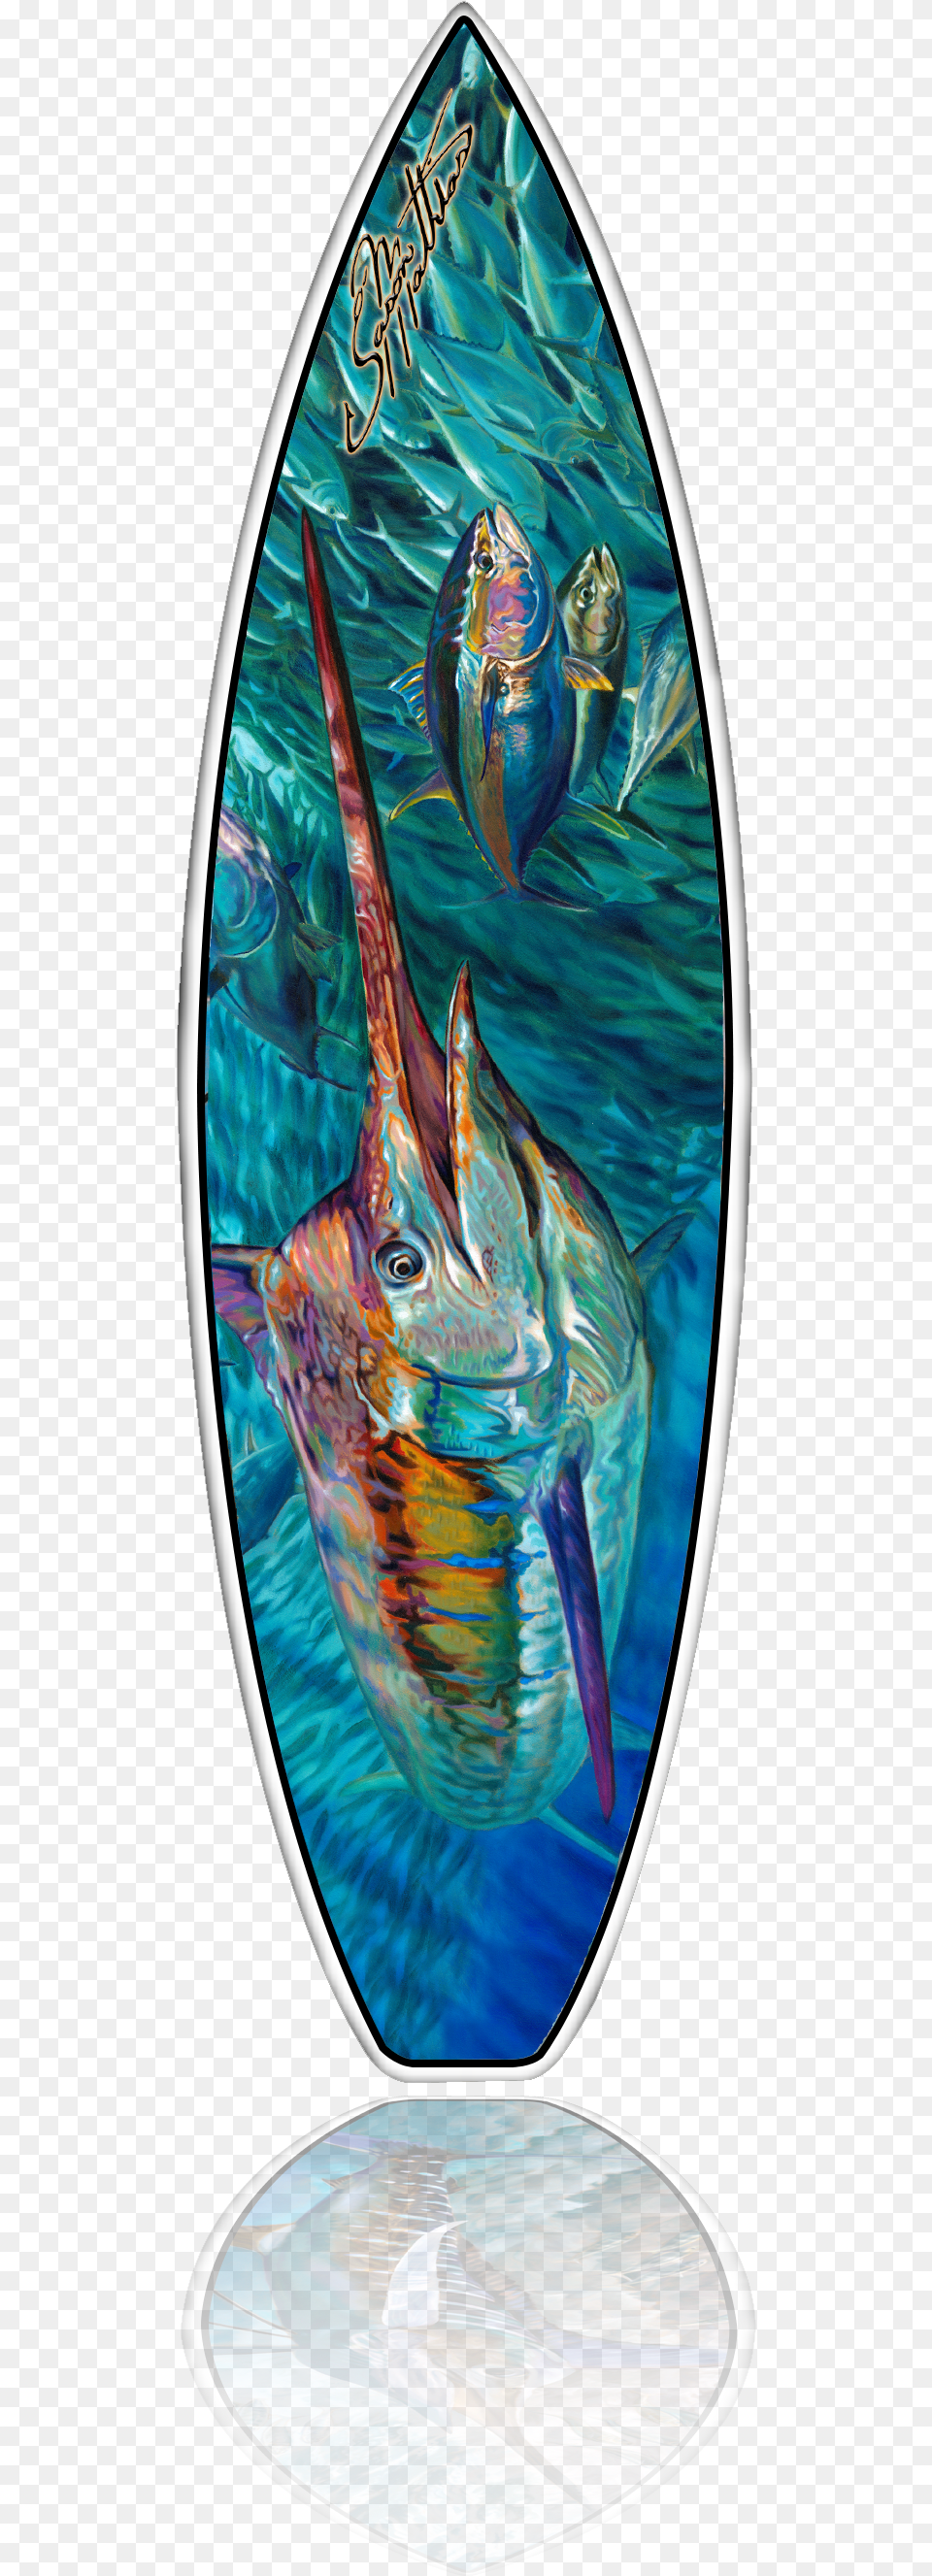 Blue Surfboard Library Surfboard, Water, Sea Waves, Sea, Outdoors Png Image